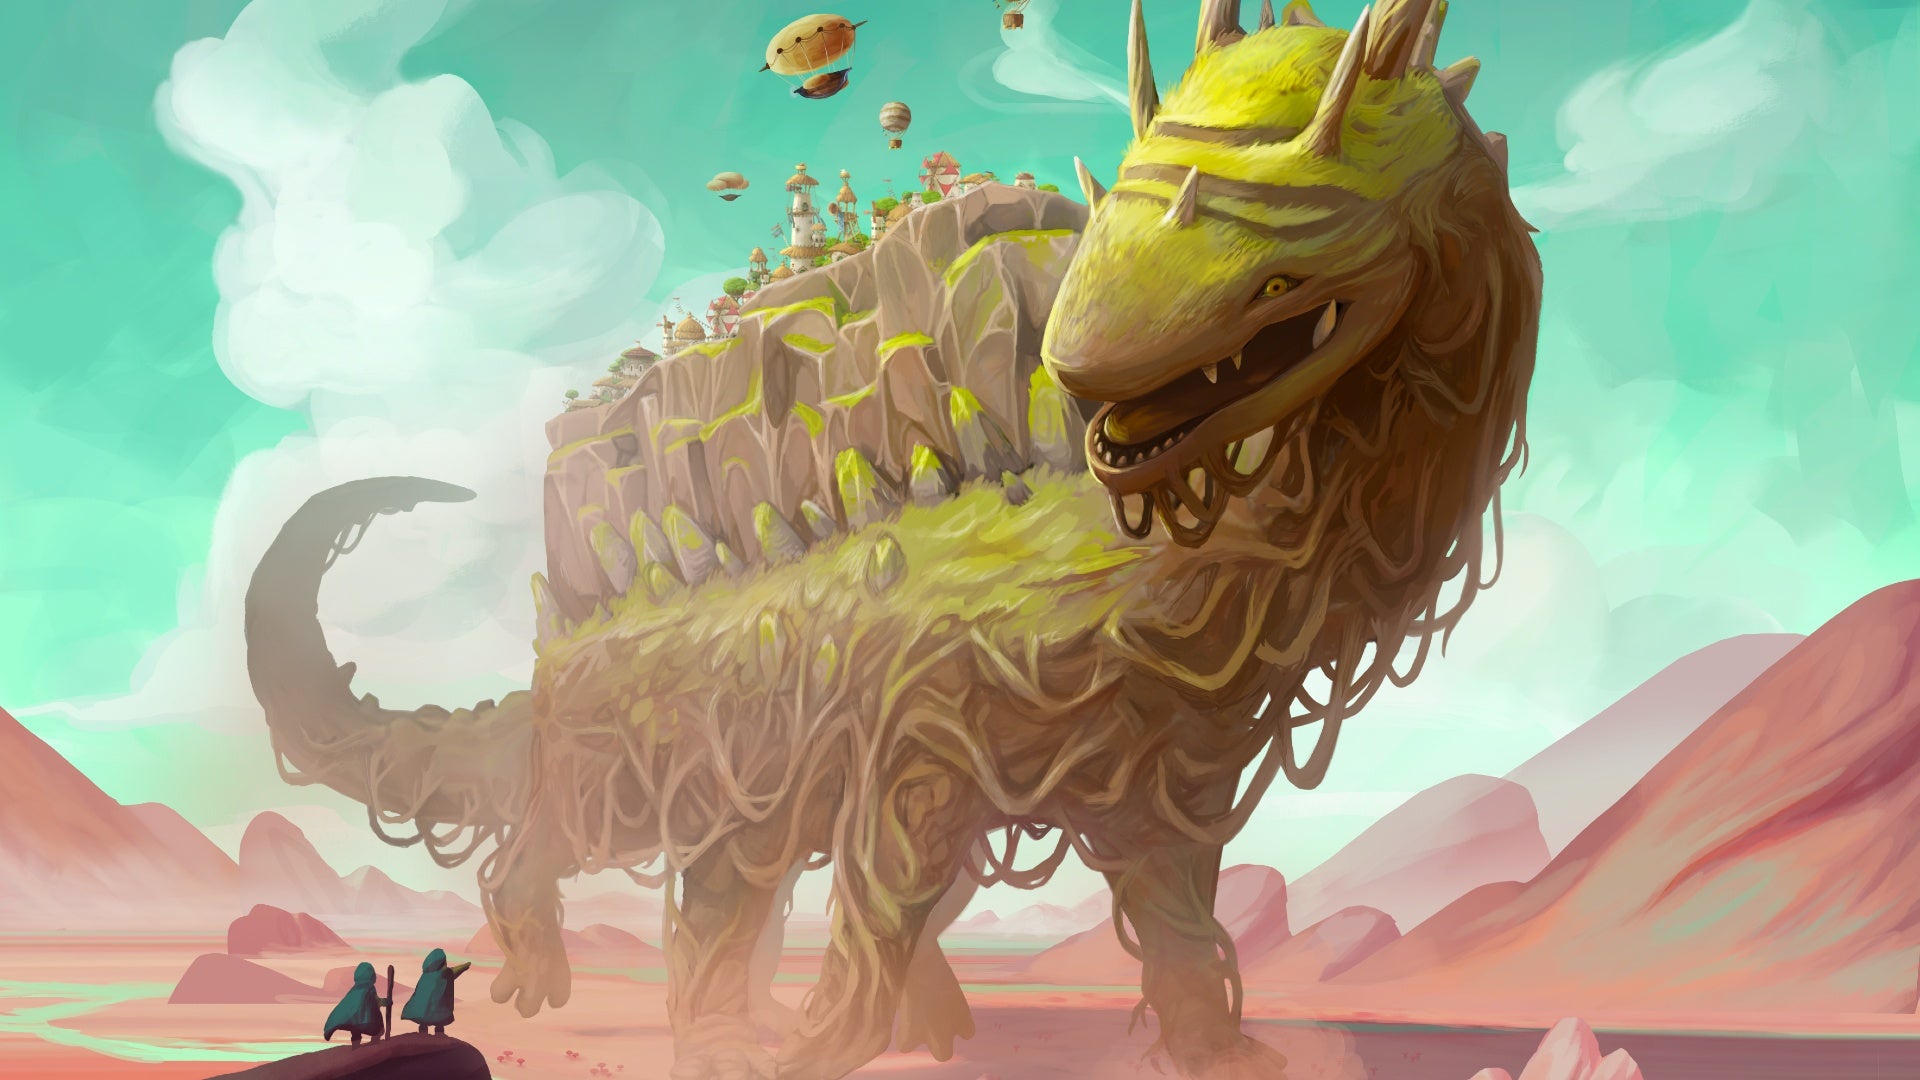 The Wandering Village is an indie city-builder that puts you in control of a tribe living on the back of a giant turtle creature.